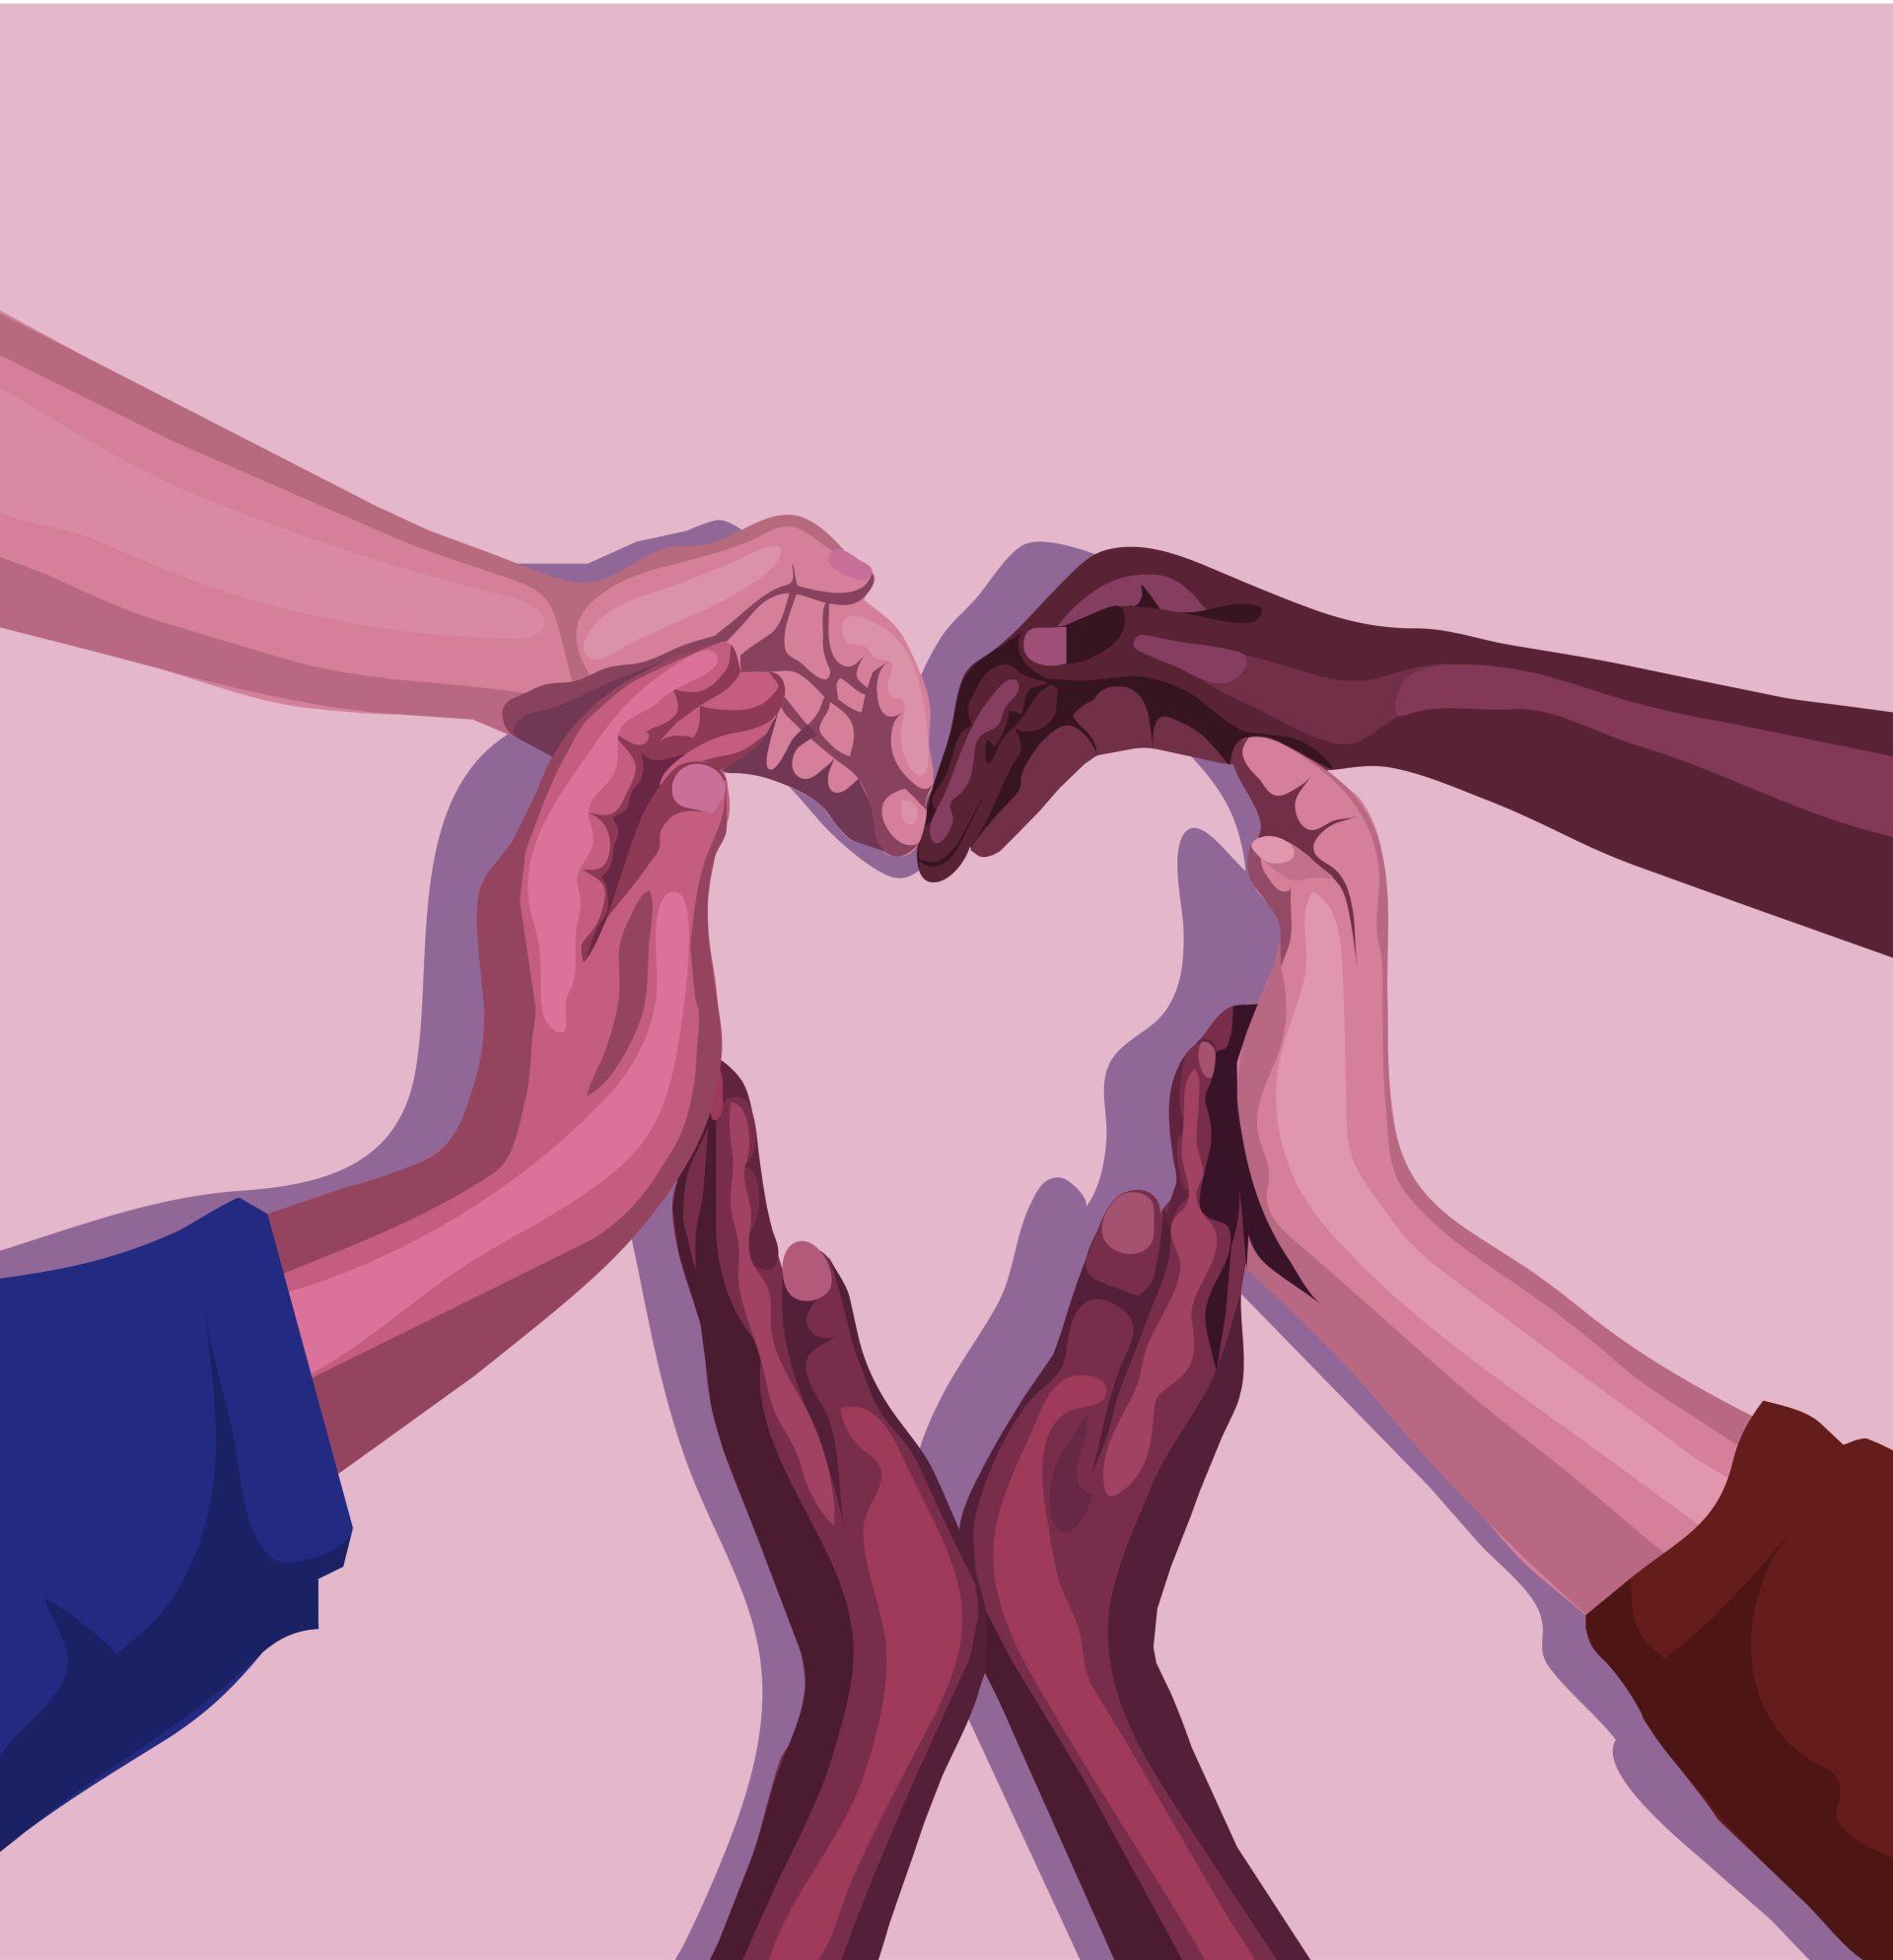 a group of people making a heart shape with their hands